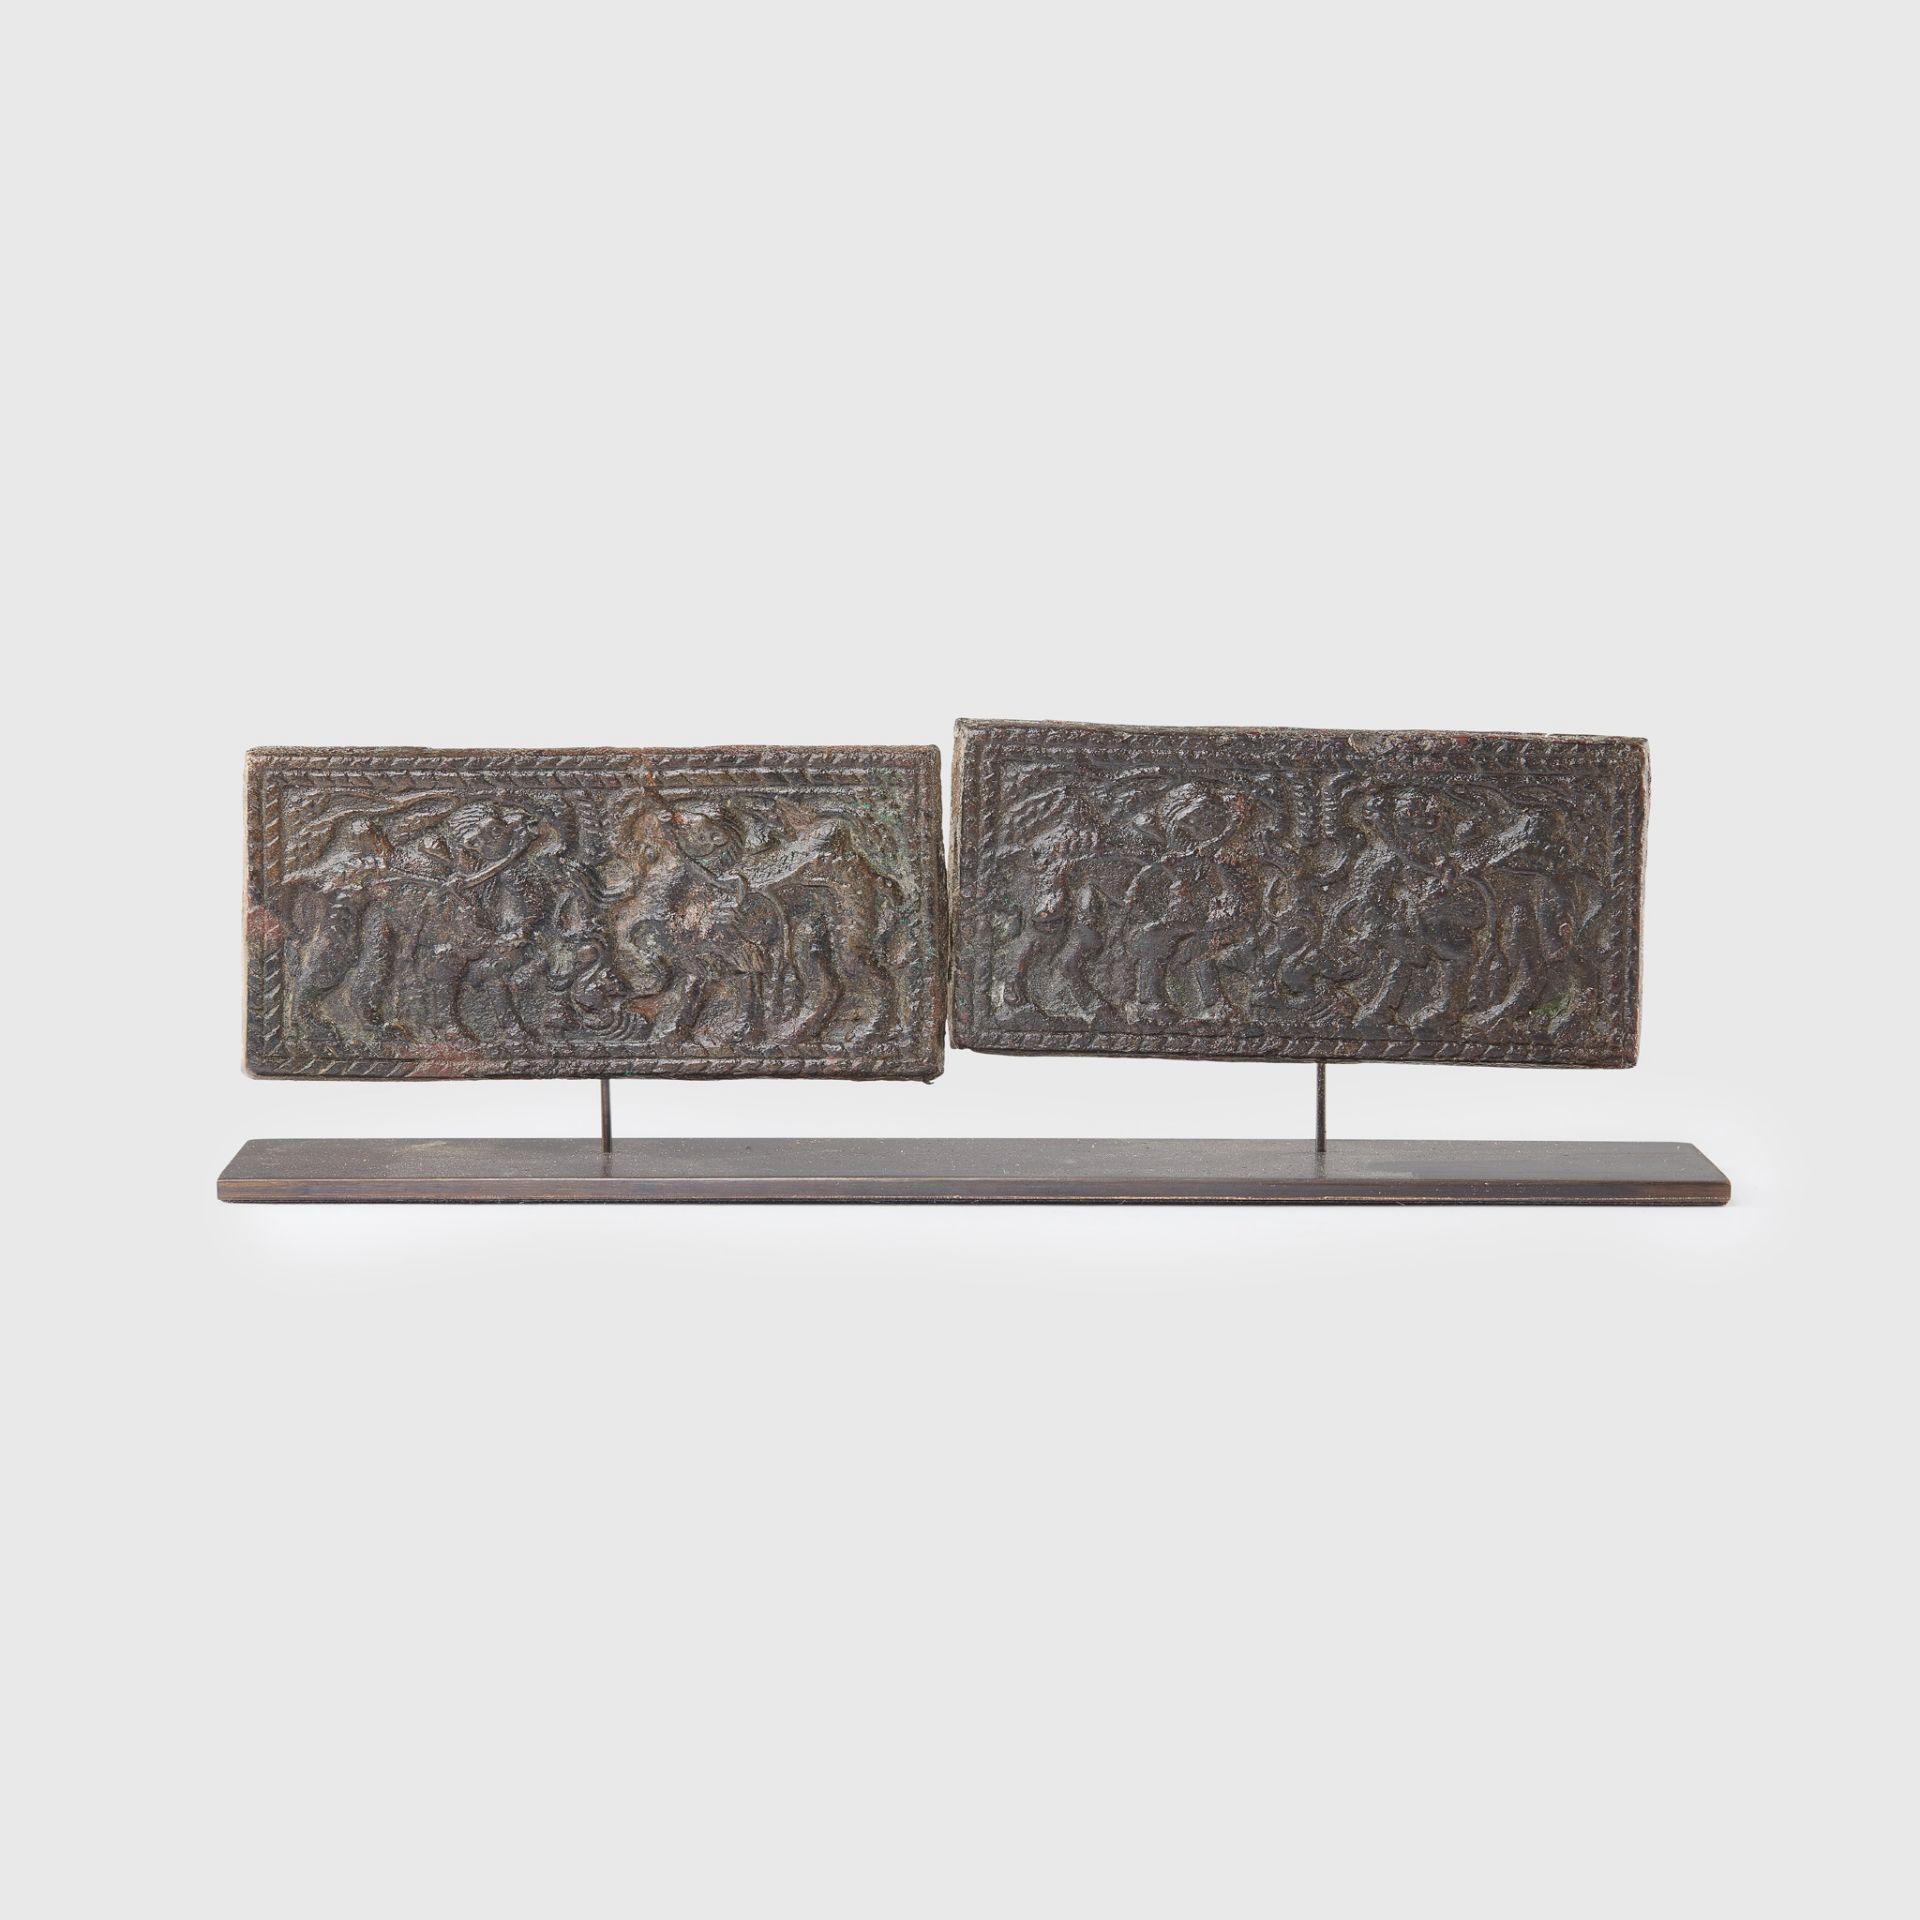 COLLECTION OF ORDOS BRONZE PLAQUES NORTHERN CHINA, 3RD - 2ND CENTURY B.C. - Image 2 of 2